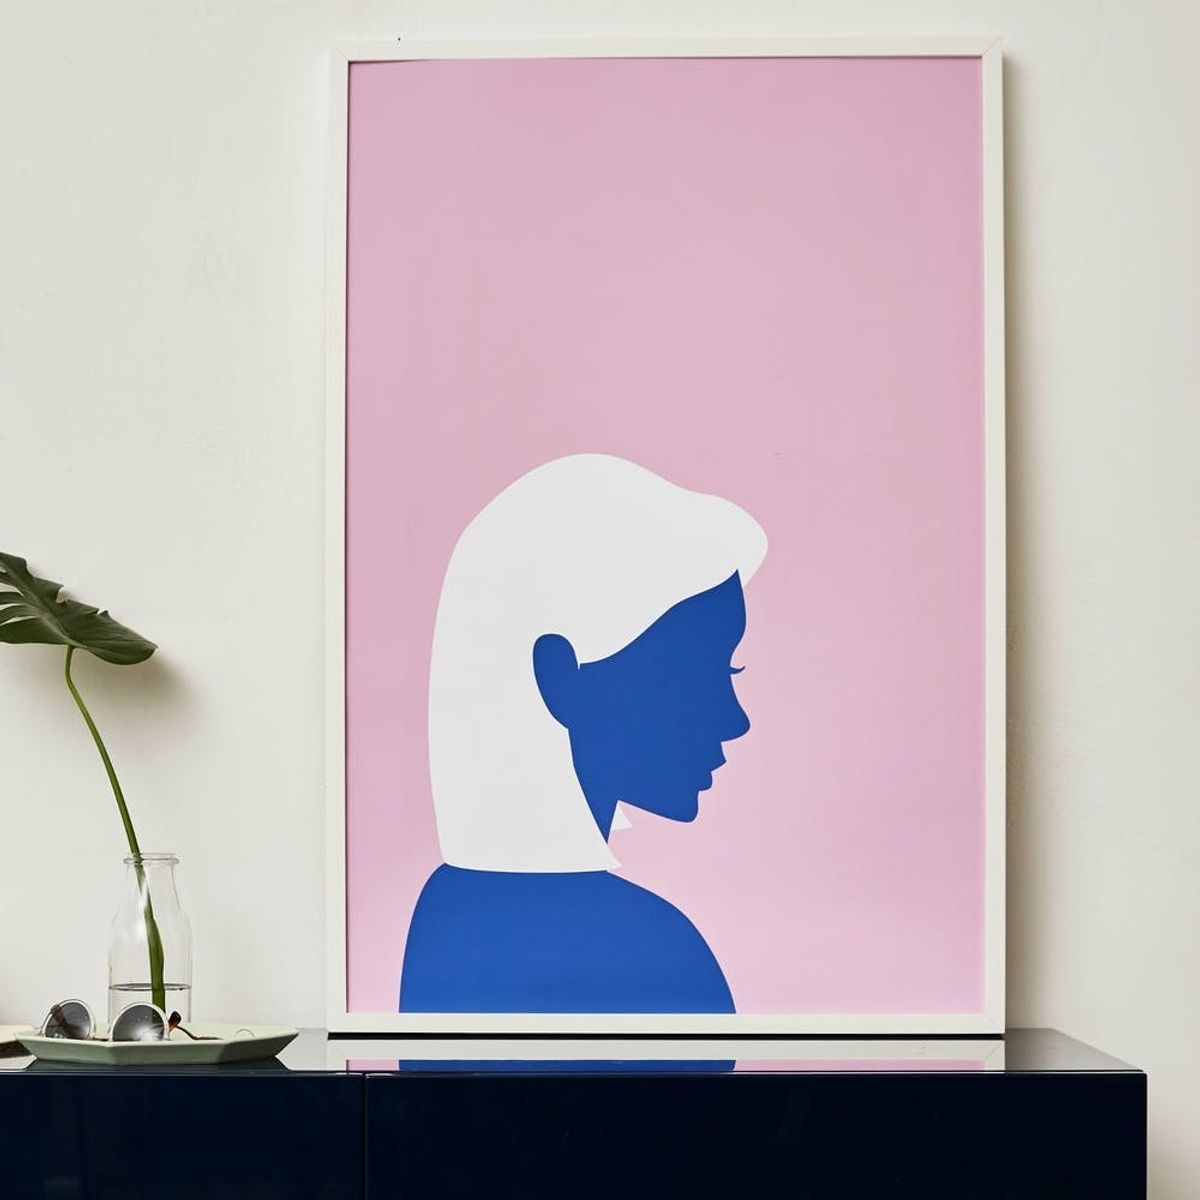 Our Fave Wallpaper Company Just Launched an Art Print Shop and We Can’t Even